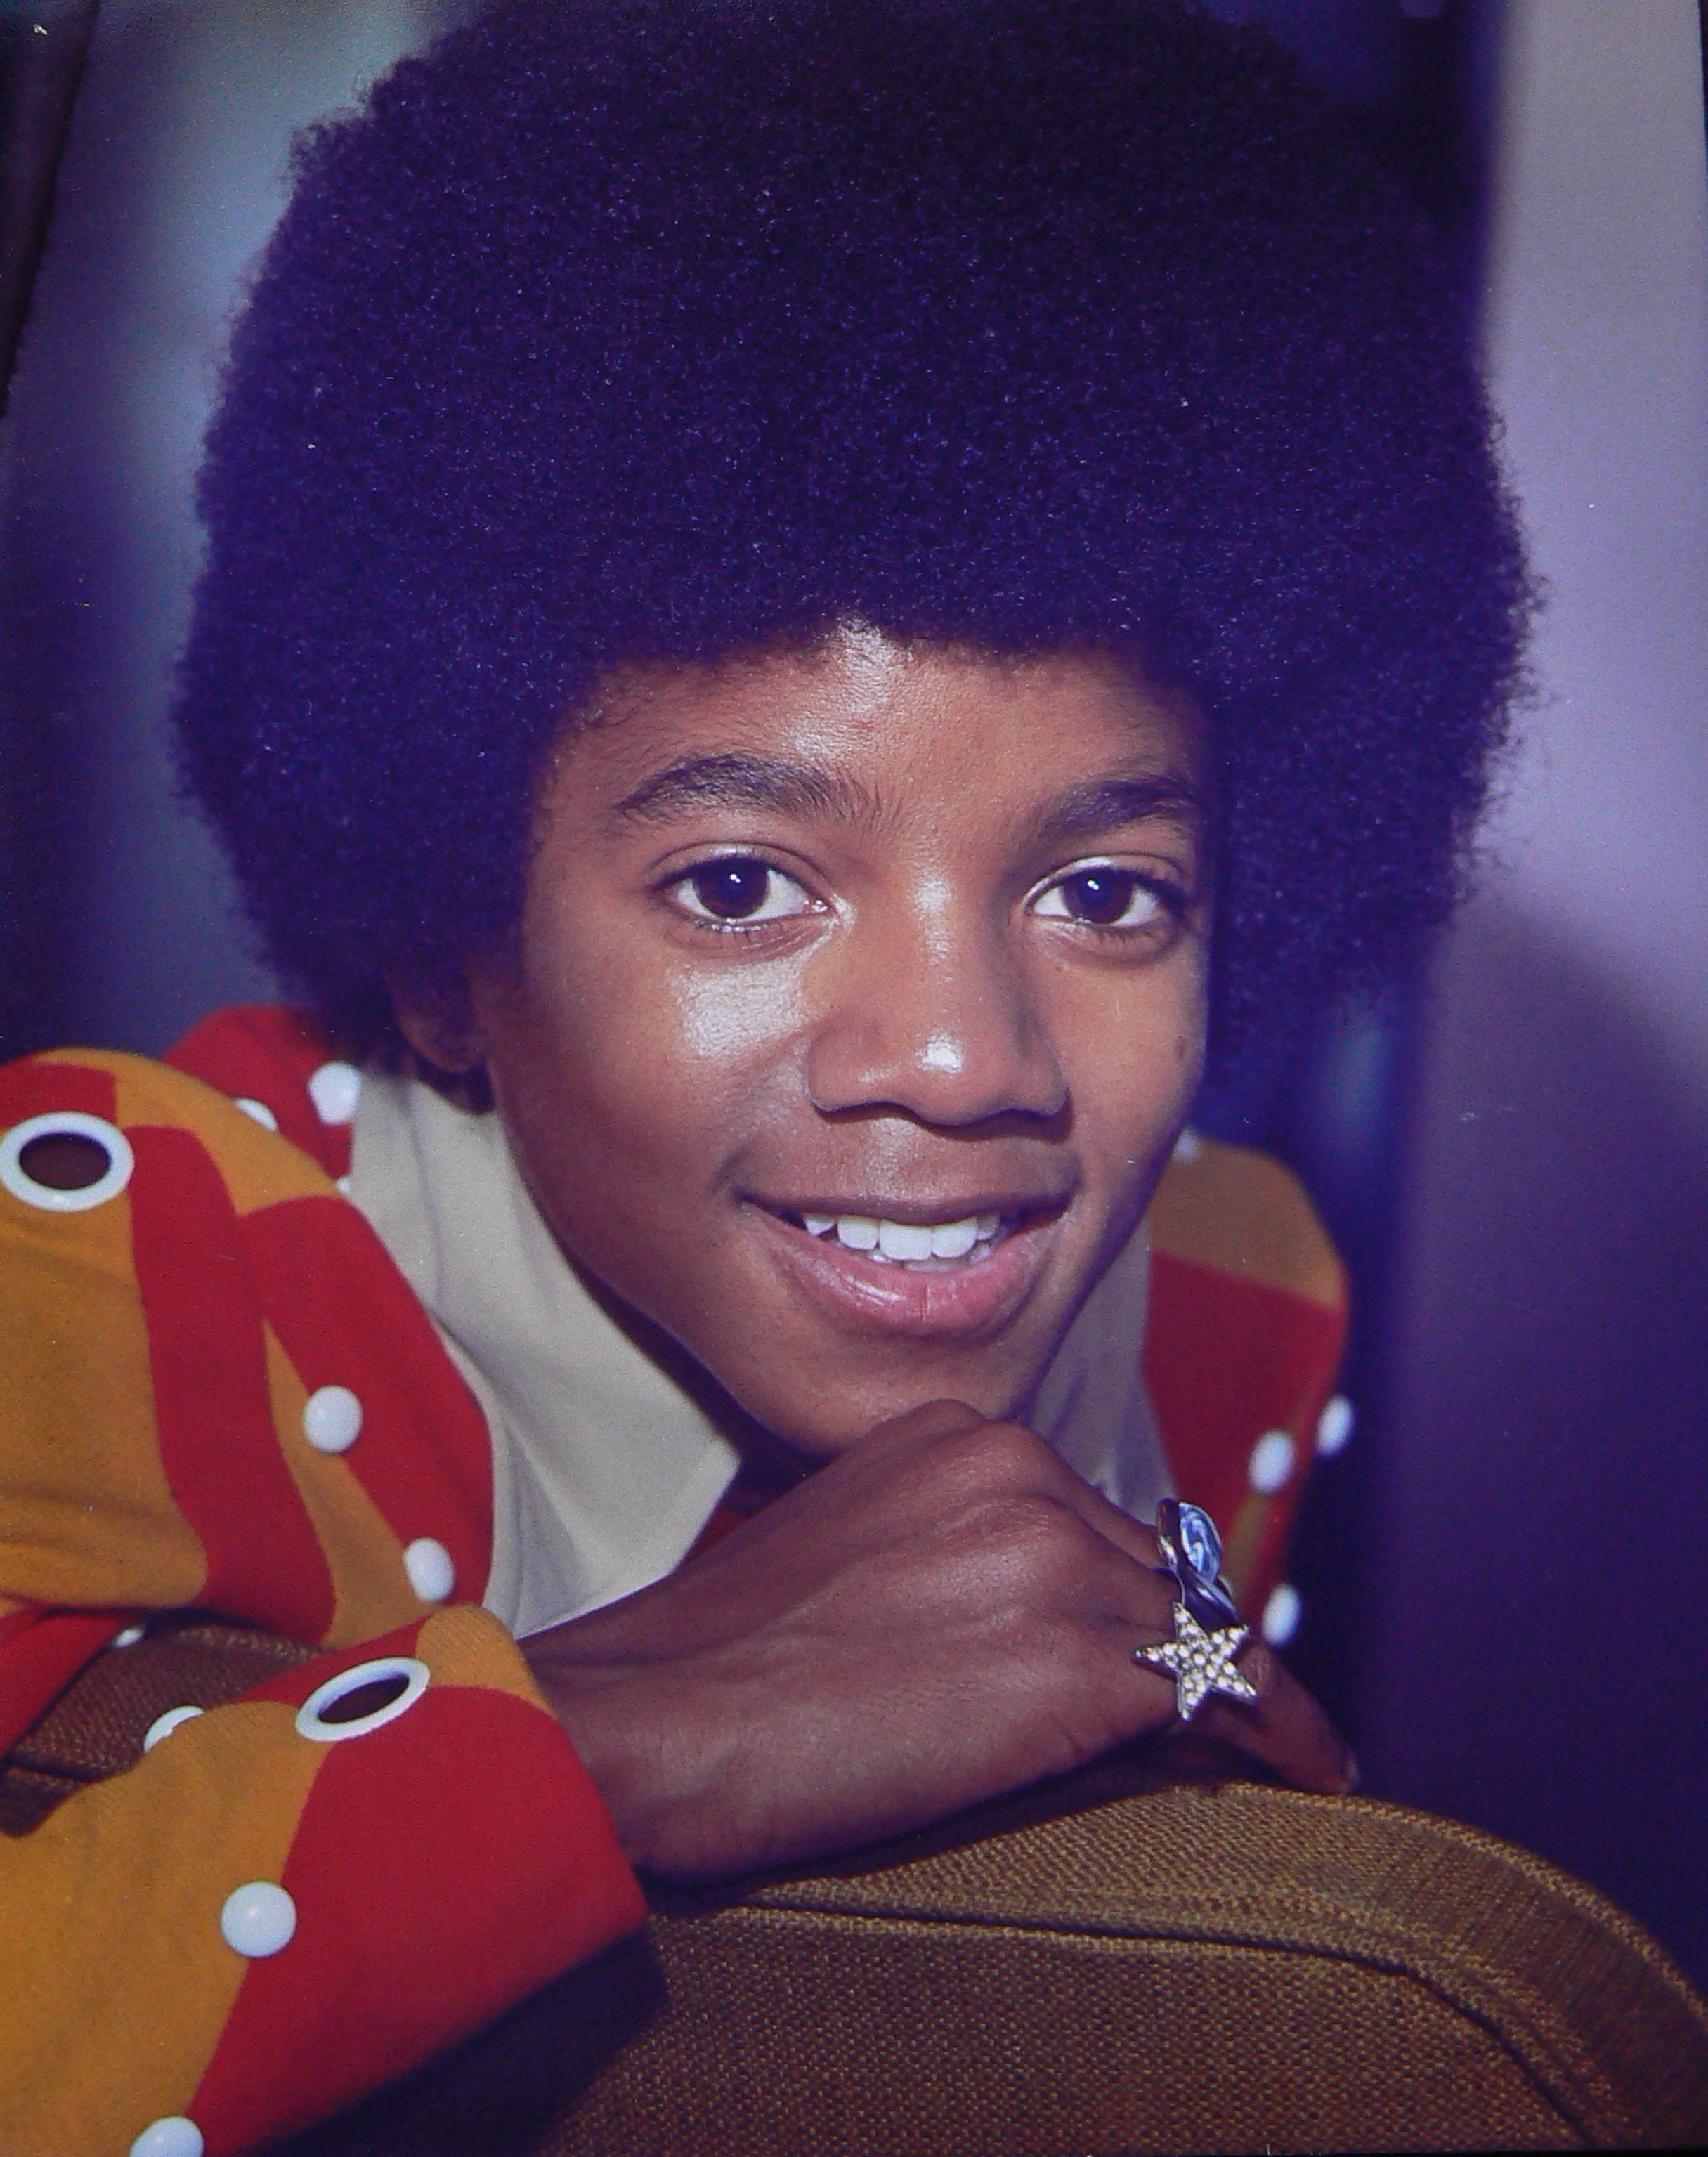 Michael Jackson in 1972 | Source: Getty Images